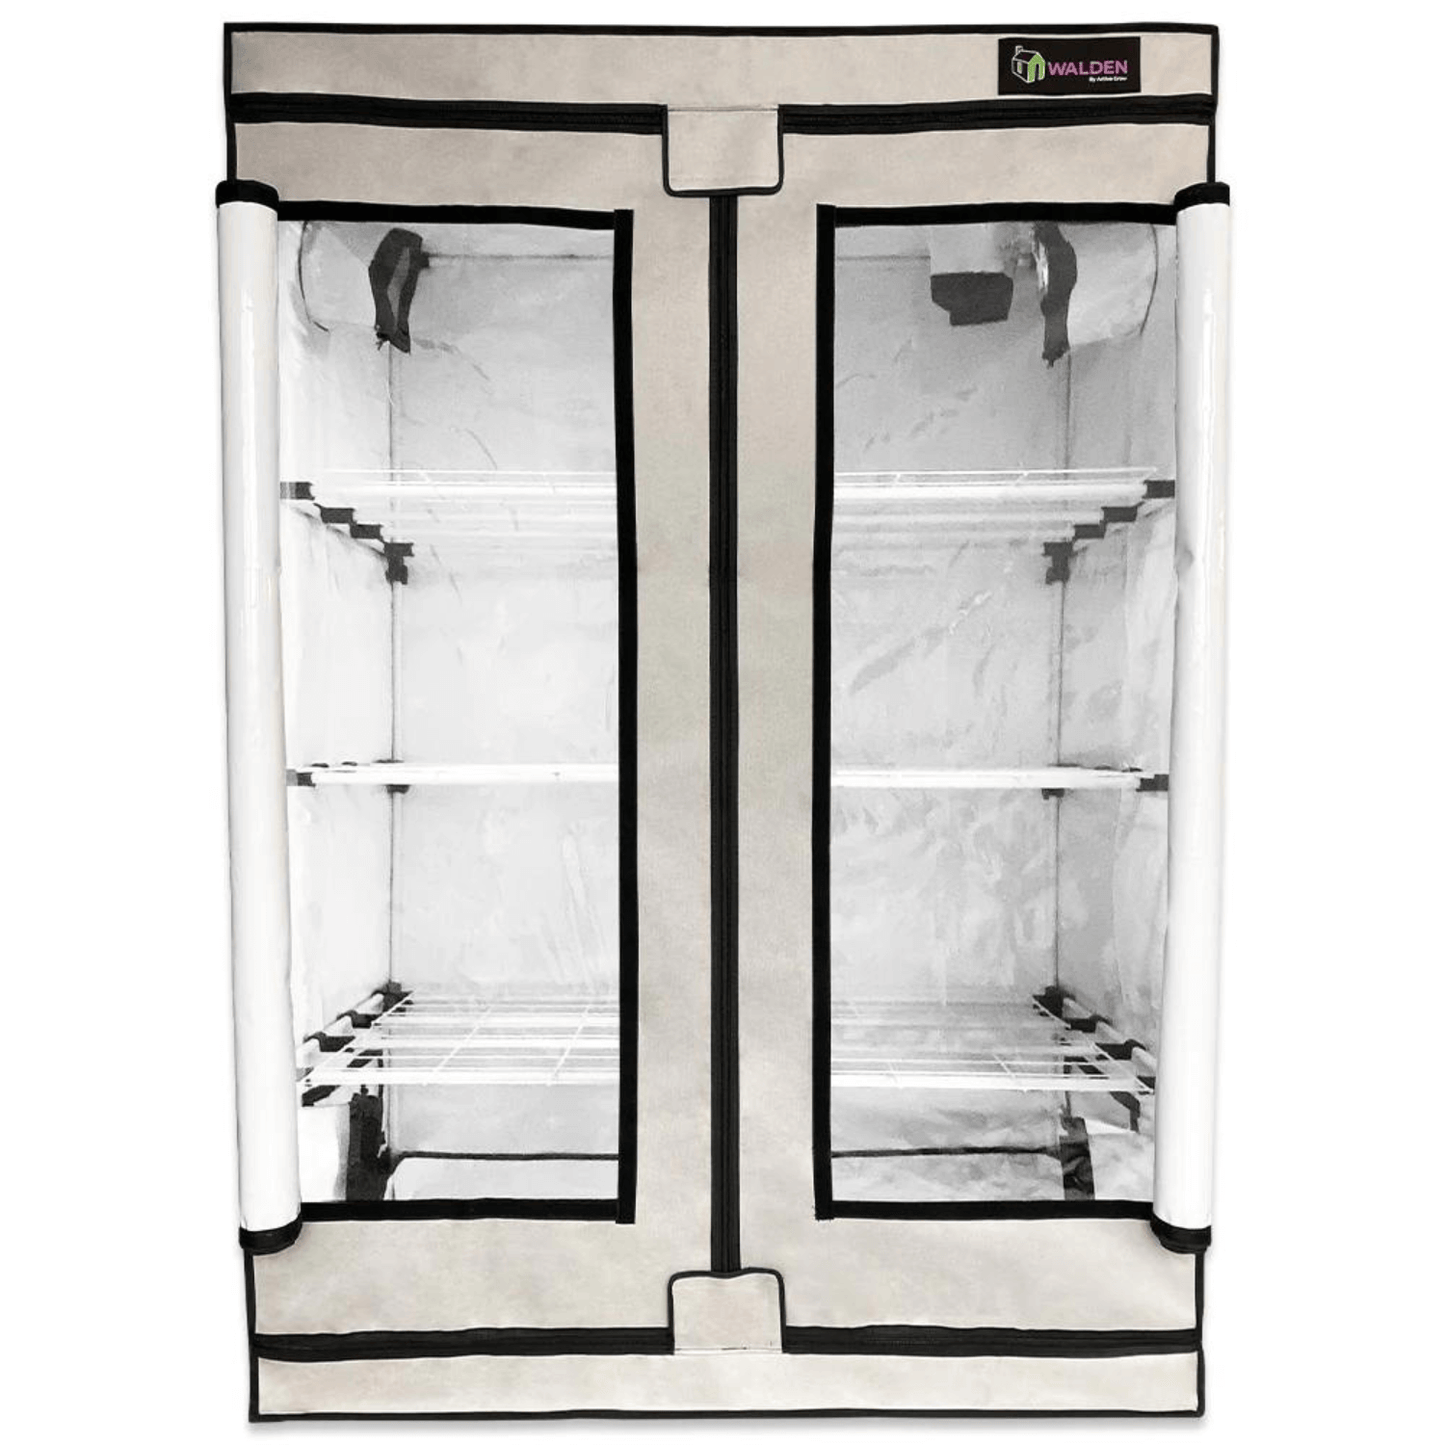 Active Grow Flowers & Fruits High Intensity 2' x 4' 3-Tier LED Walden White Grow Tent Kit | AG/24TENT/W/3S/FK | Grow Tents Depot | Grow Tent Kits | 769947348193